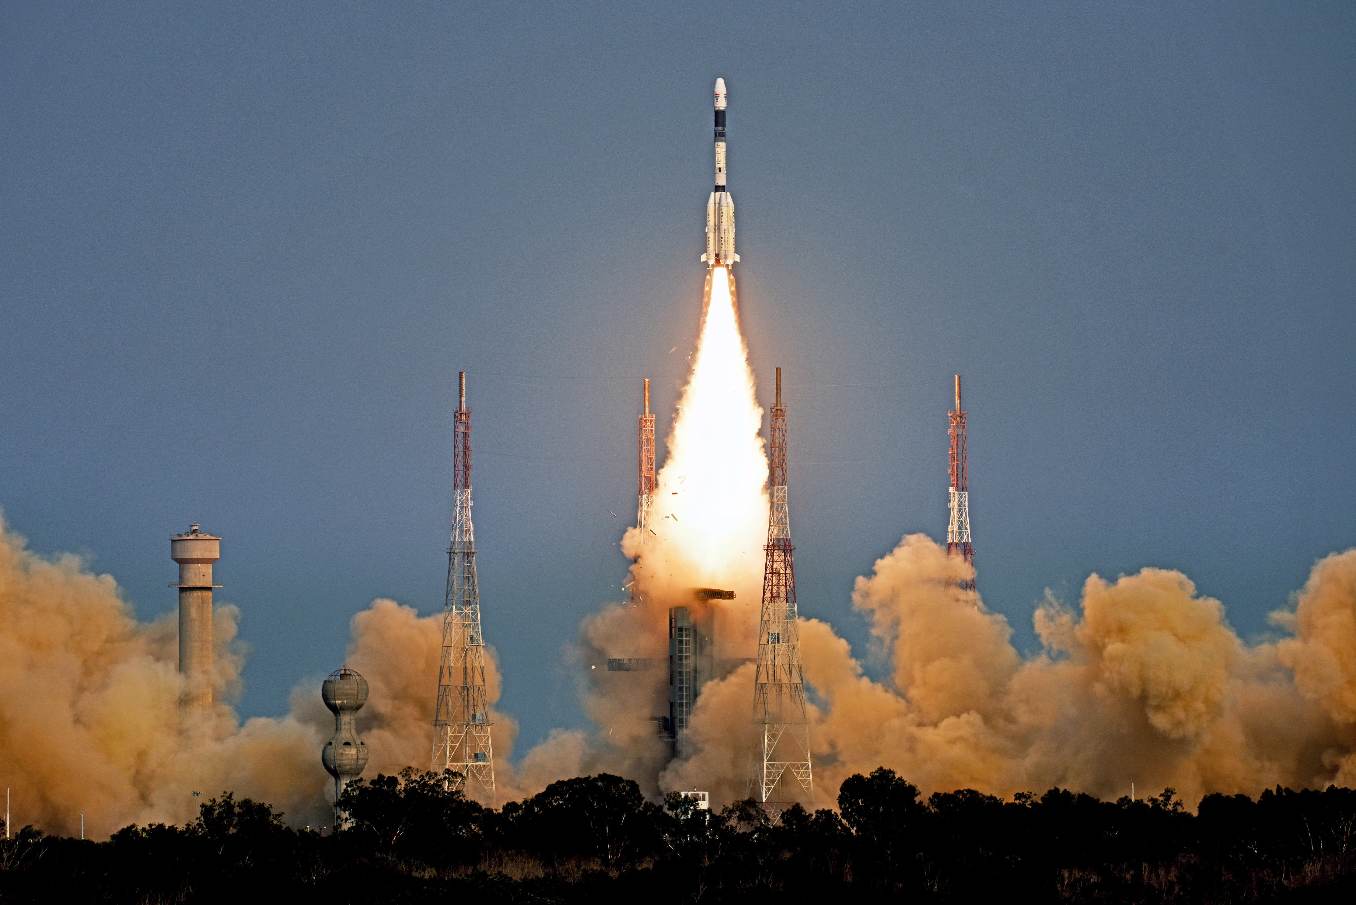 Launch success for India's GSLV